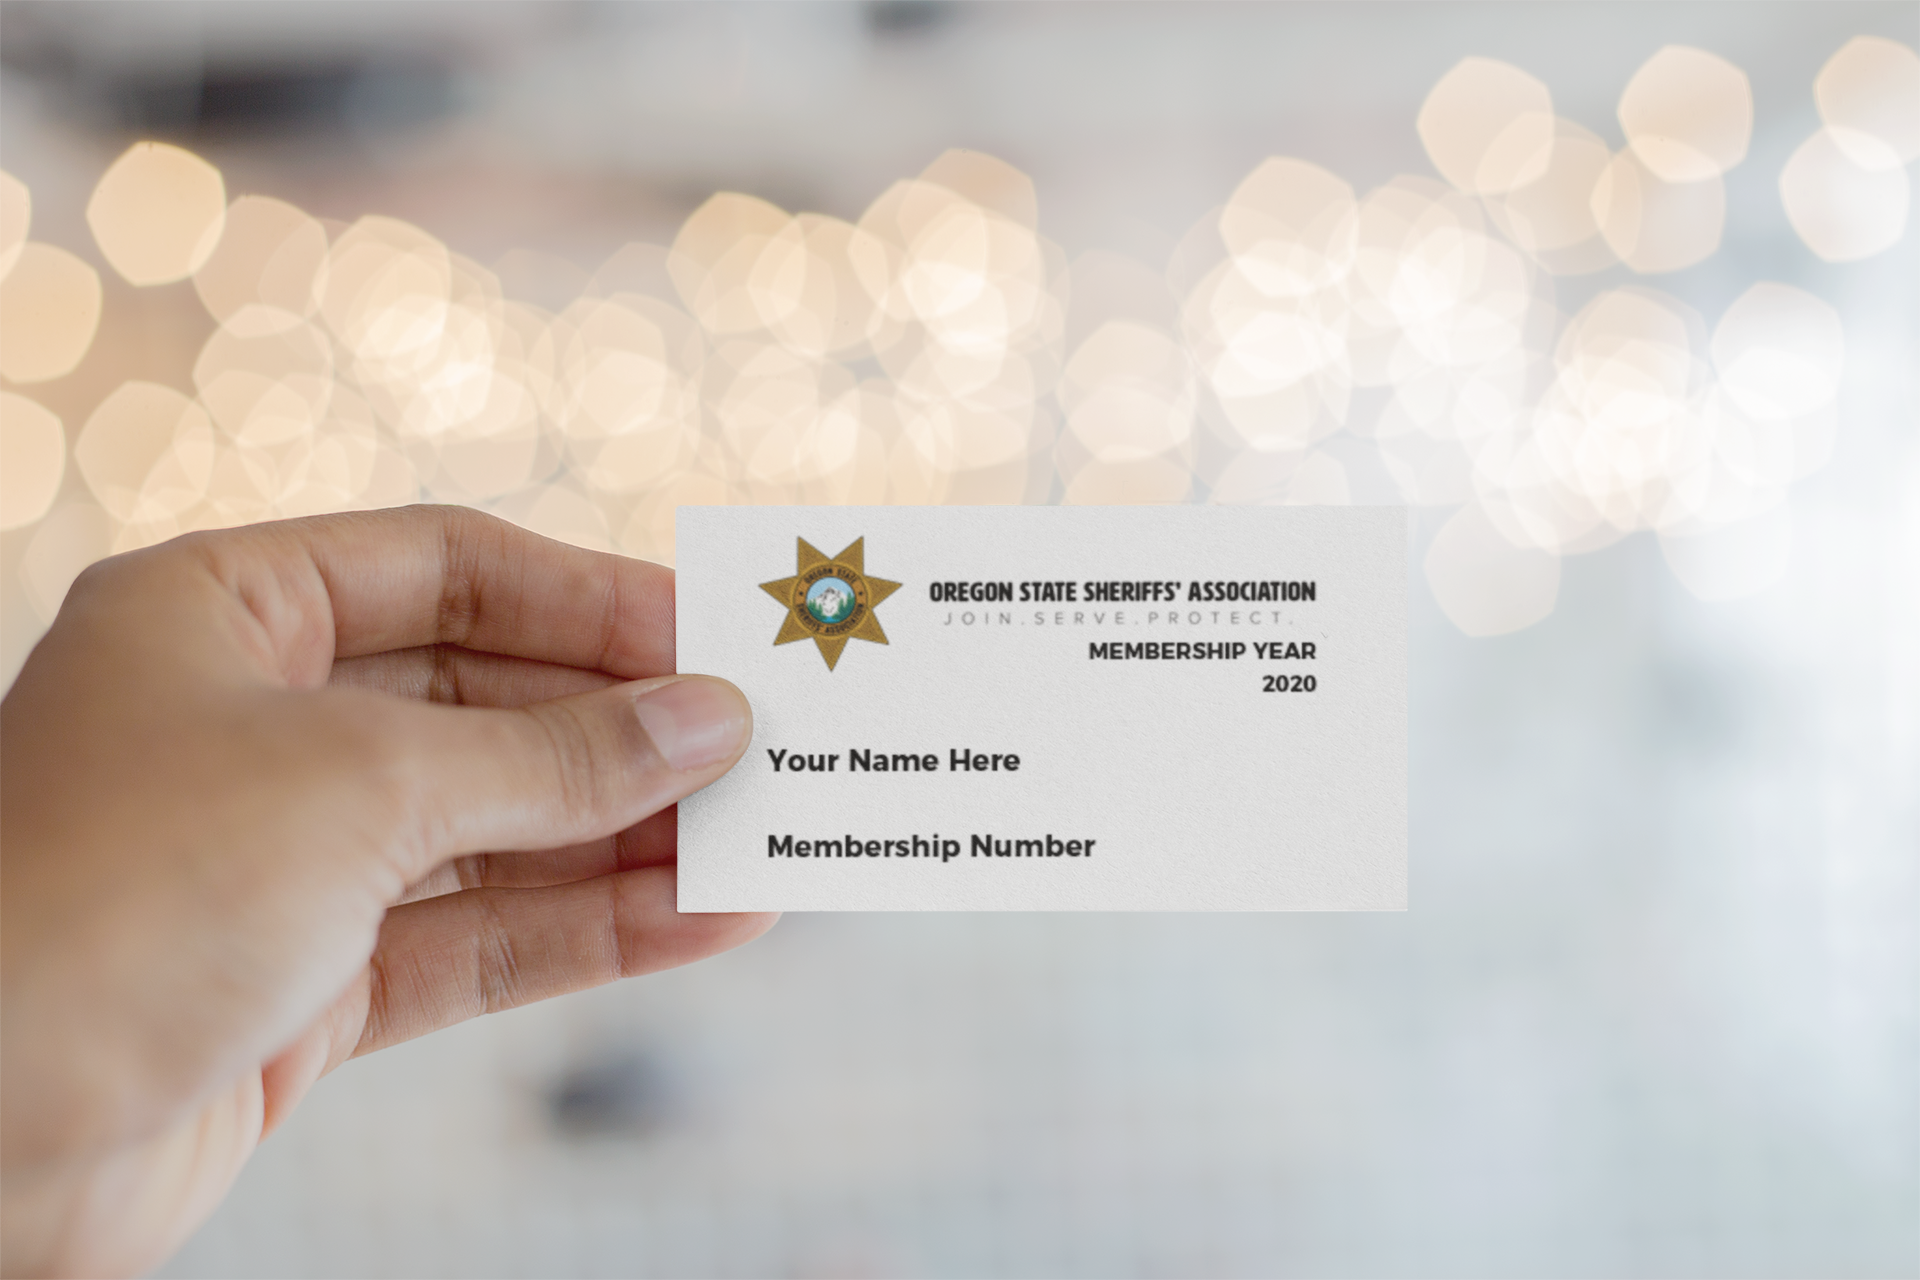 mockup-of-a-business-card-being-held-against-blurred-lights-21915-1